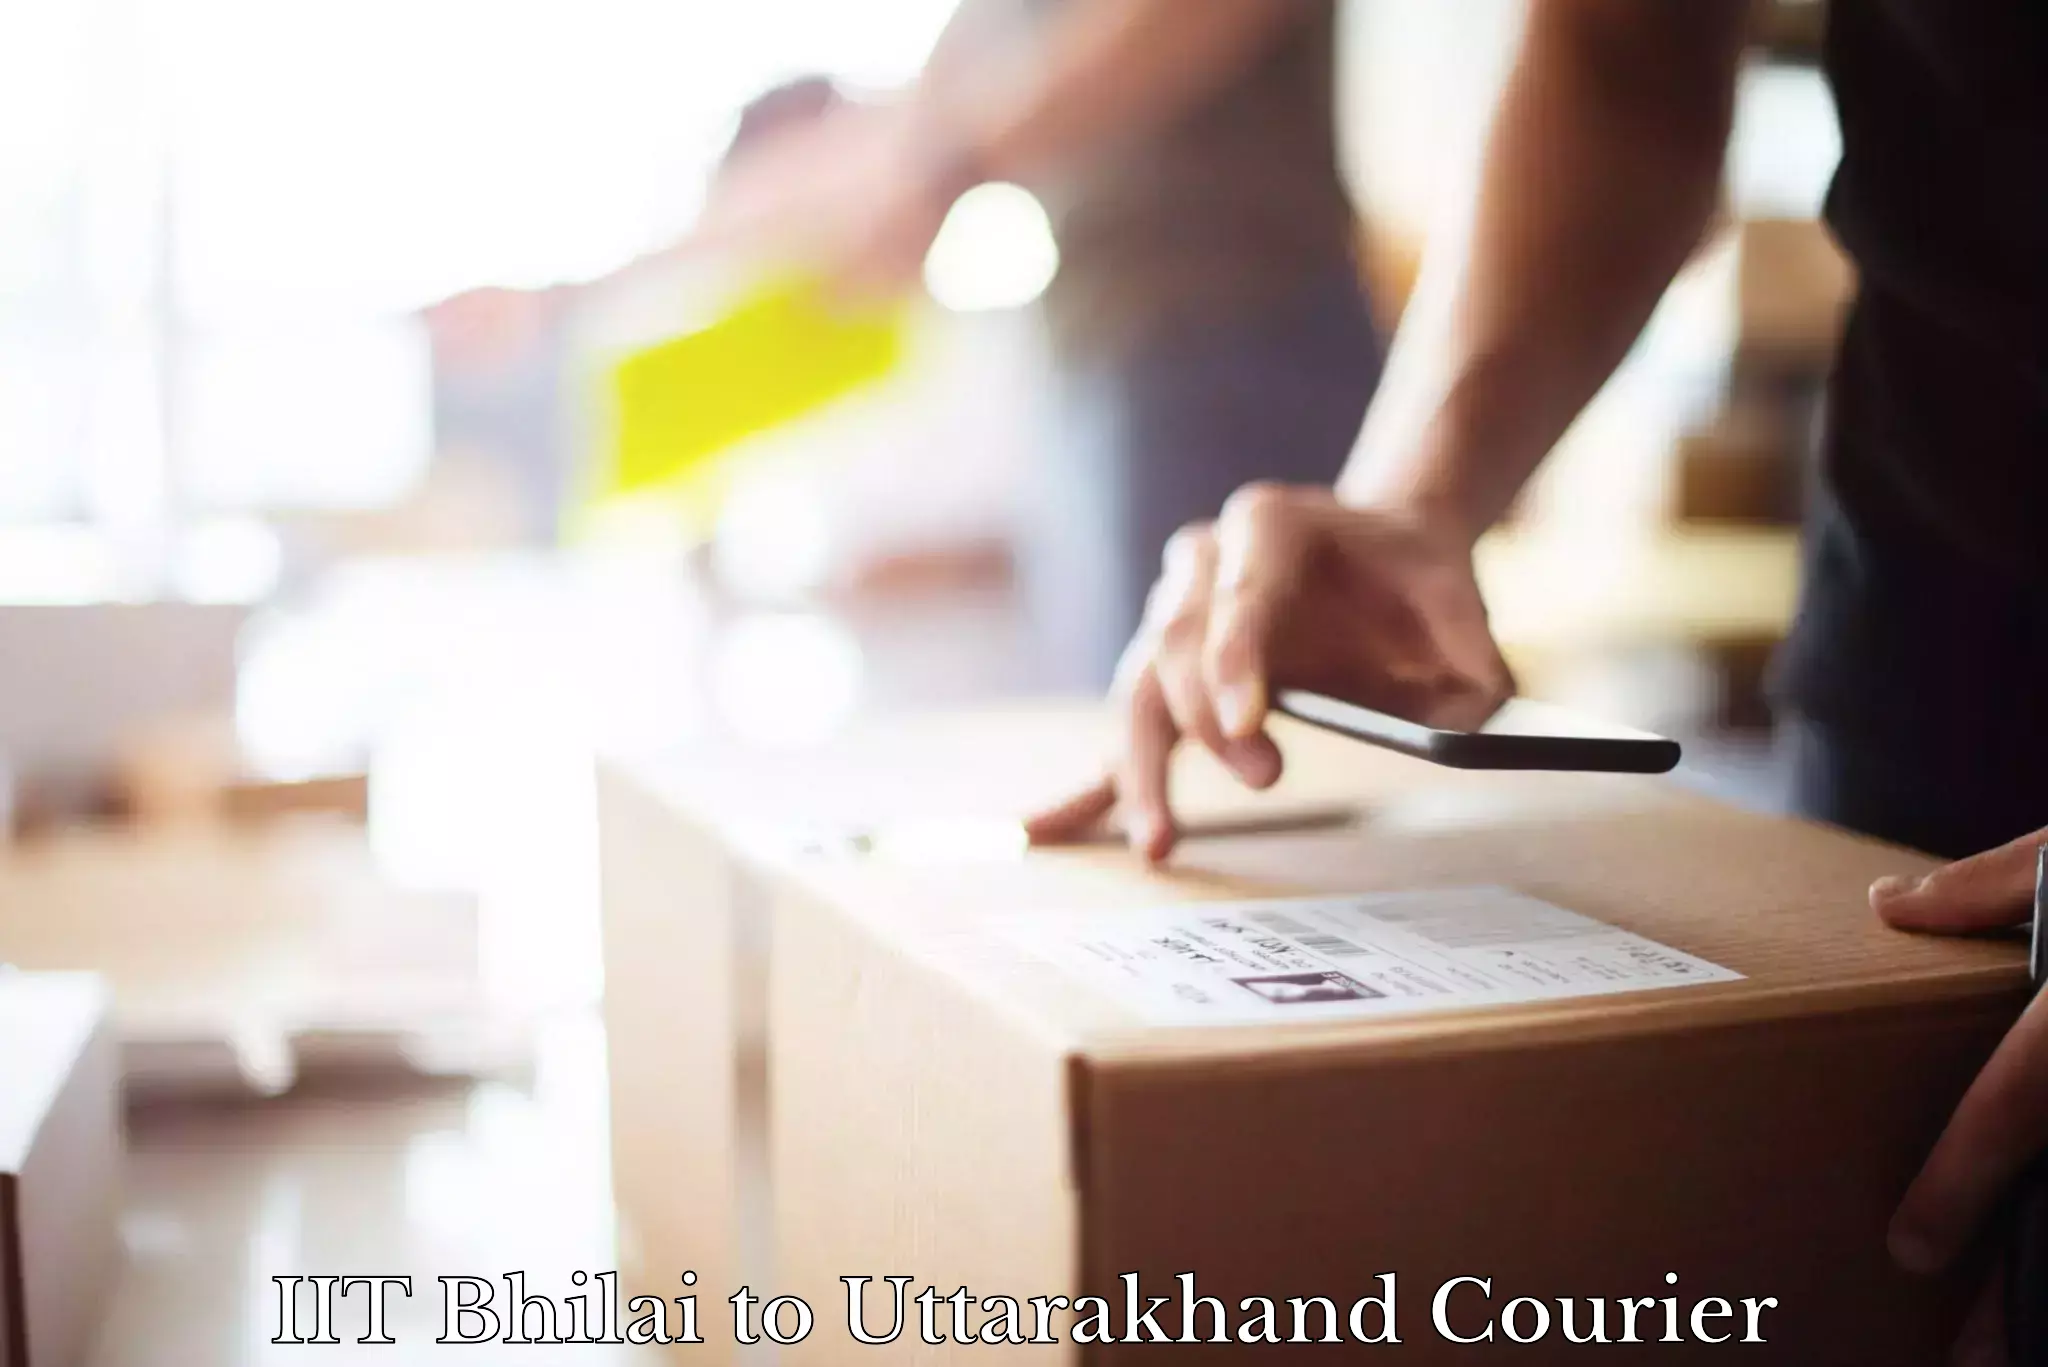 User-friendly delivery service IIT Bhilai to Uttarakhand